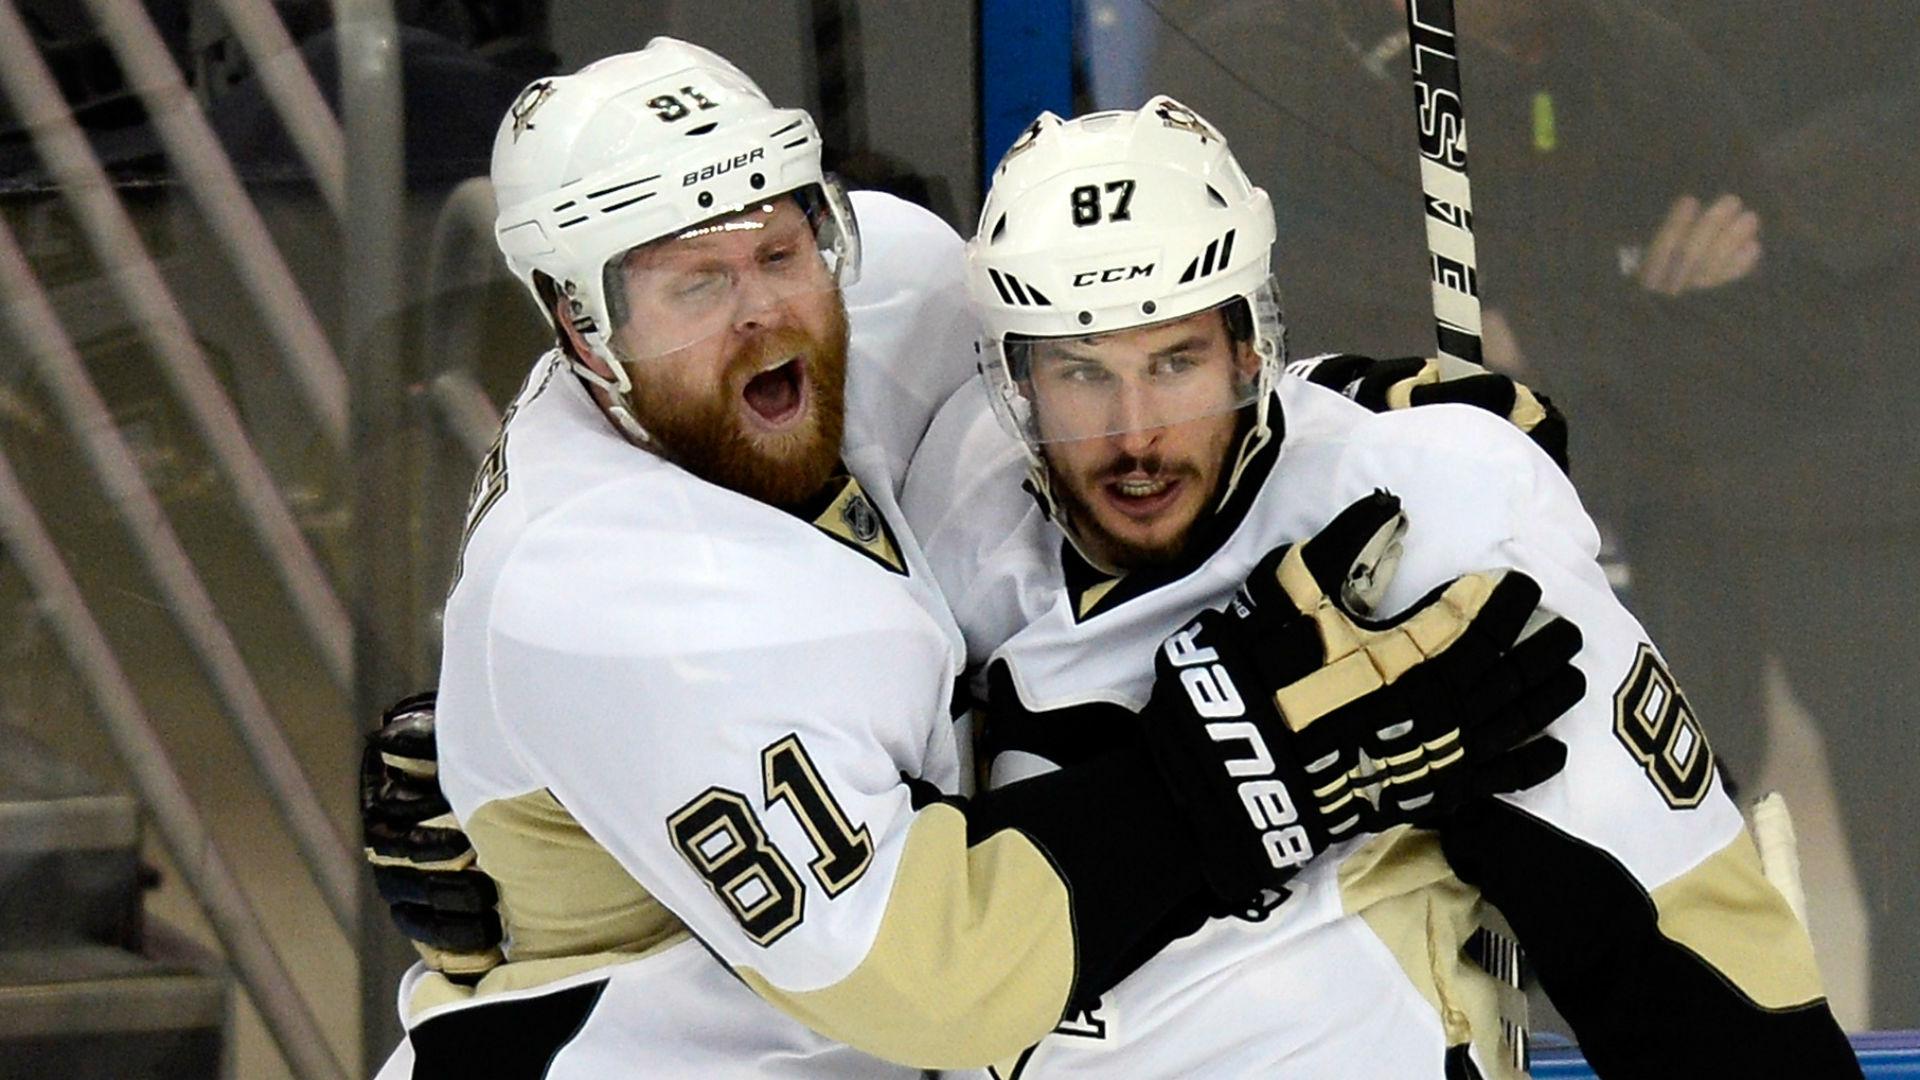 Finally, Sidney Crosby and Phil Kessel get what they deserve